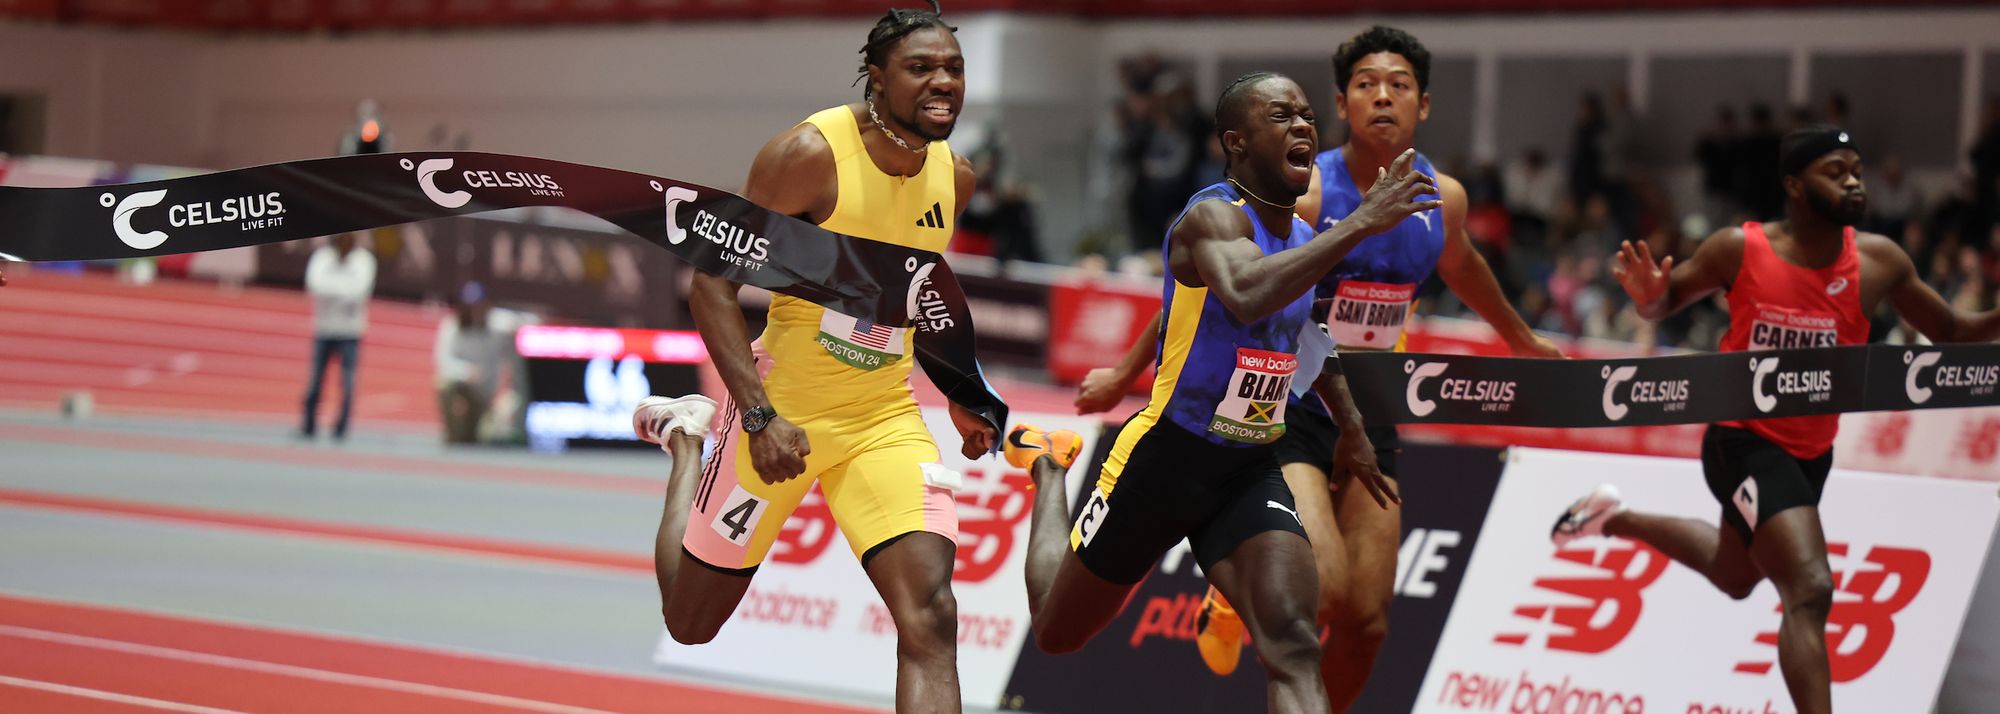 On a day when nine meeting records fell at the New Balance Indoor Grand Prix, perhaps the one with the biggest impact came from Noah Lyles 